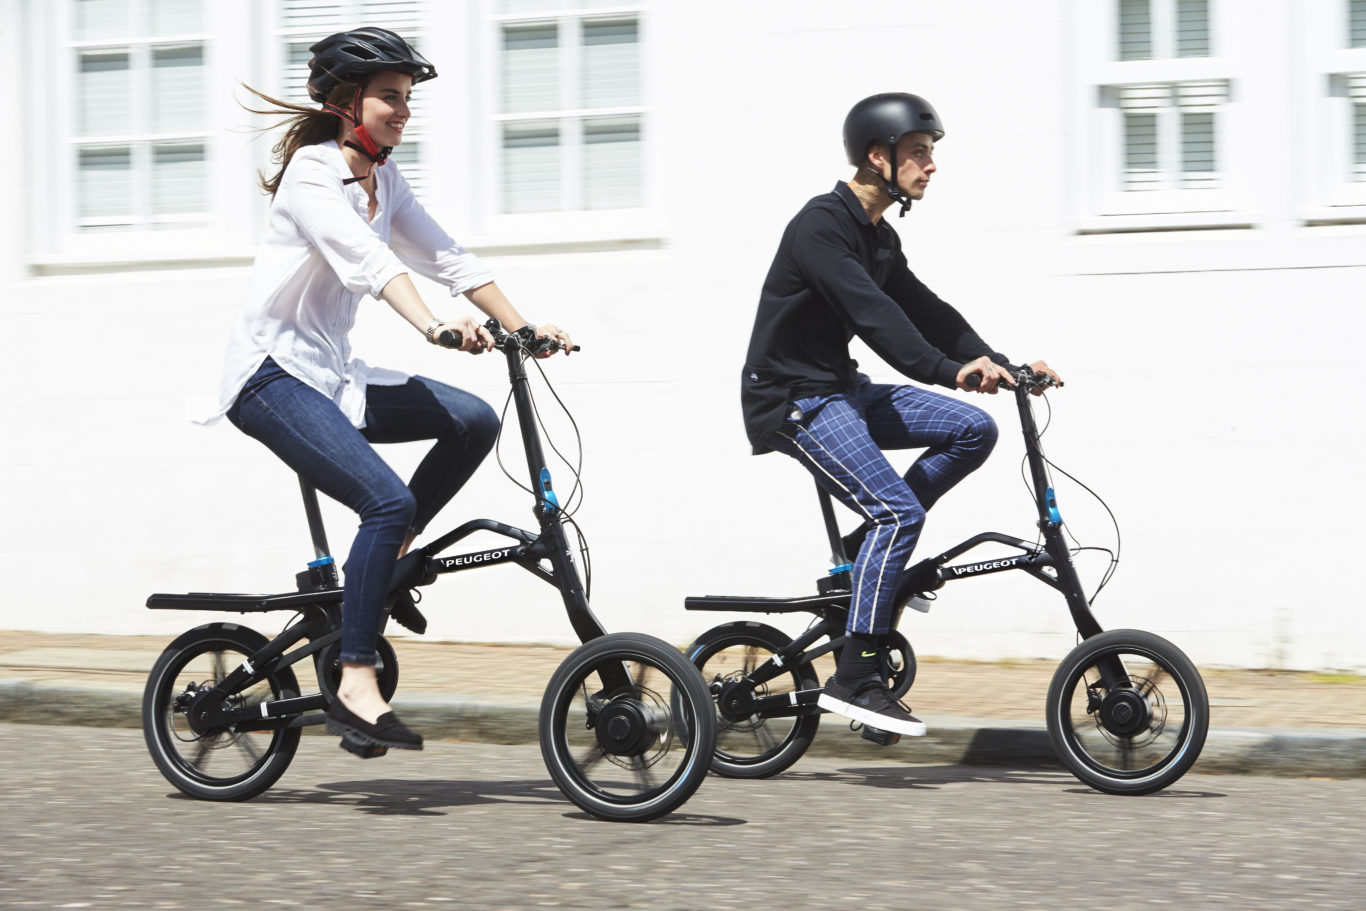 The Peugeot bicycle can reach speeds of up to 12.5mph